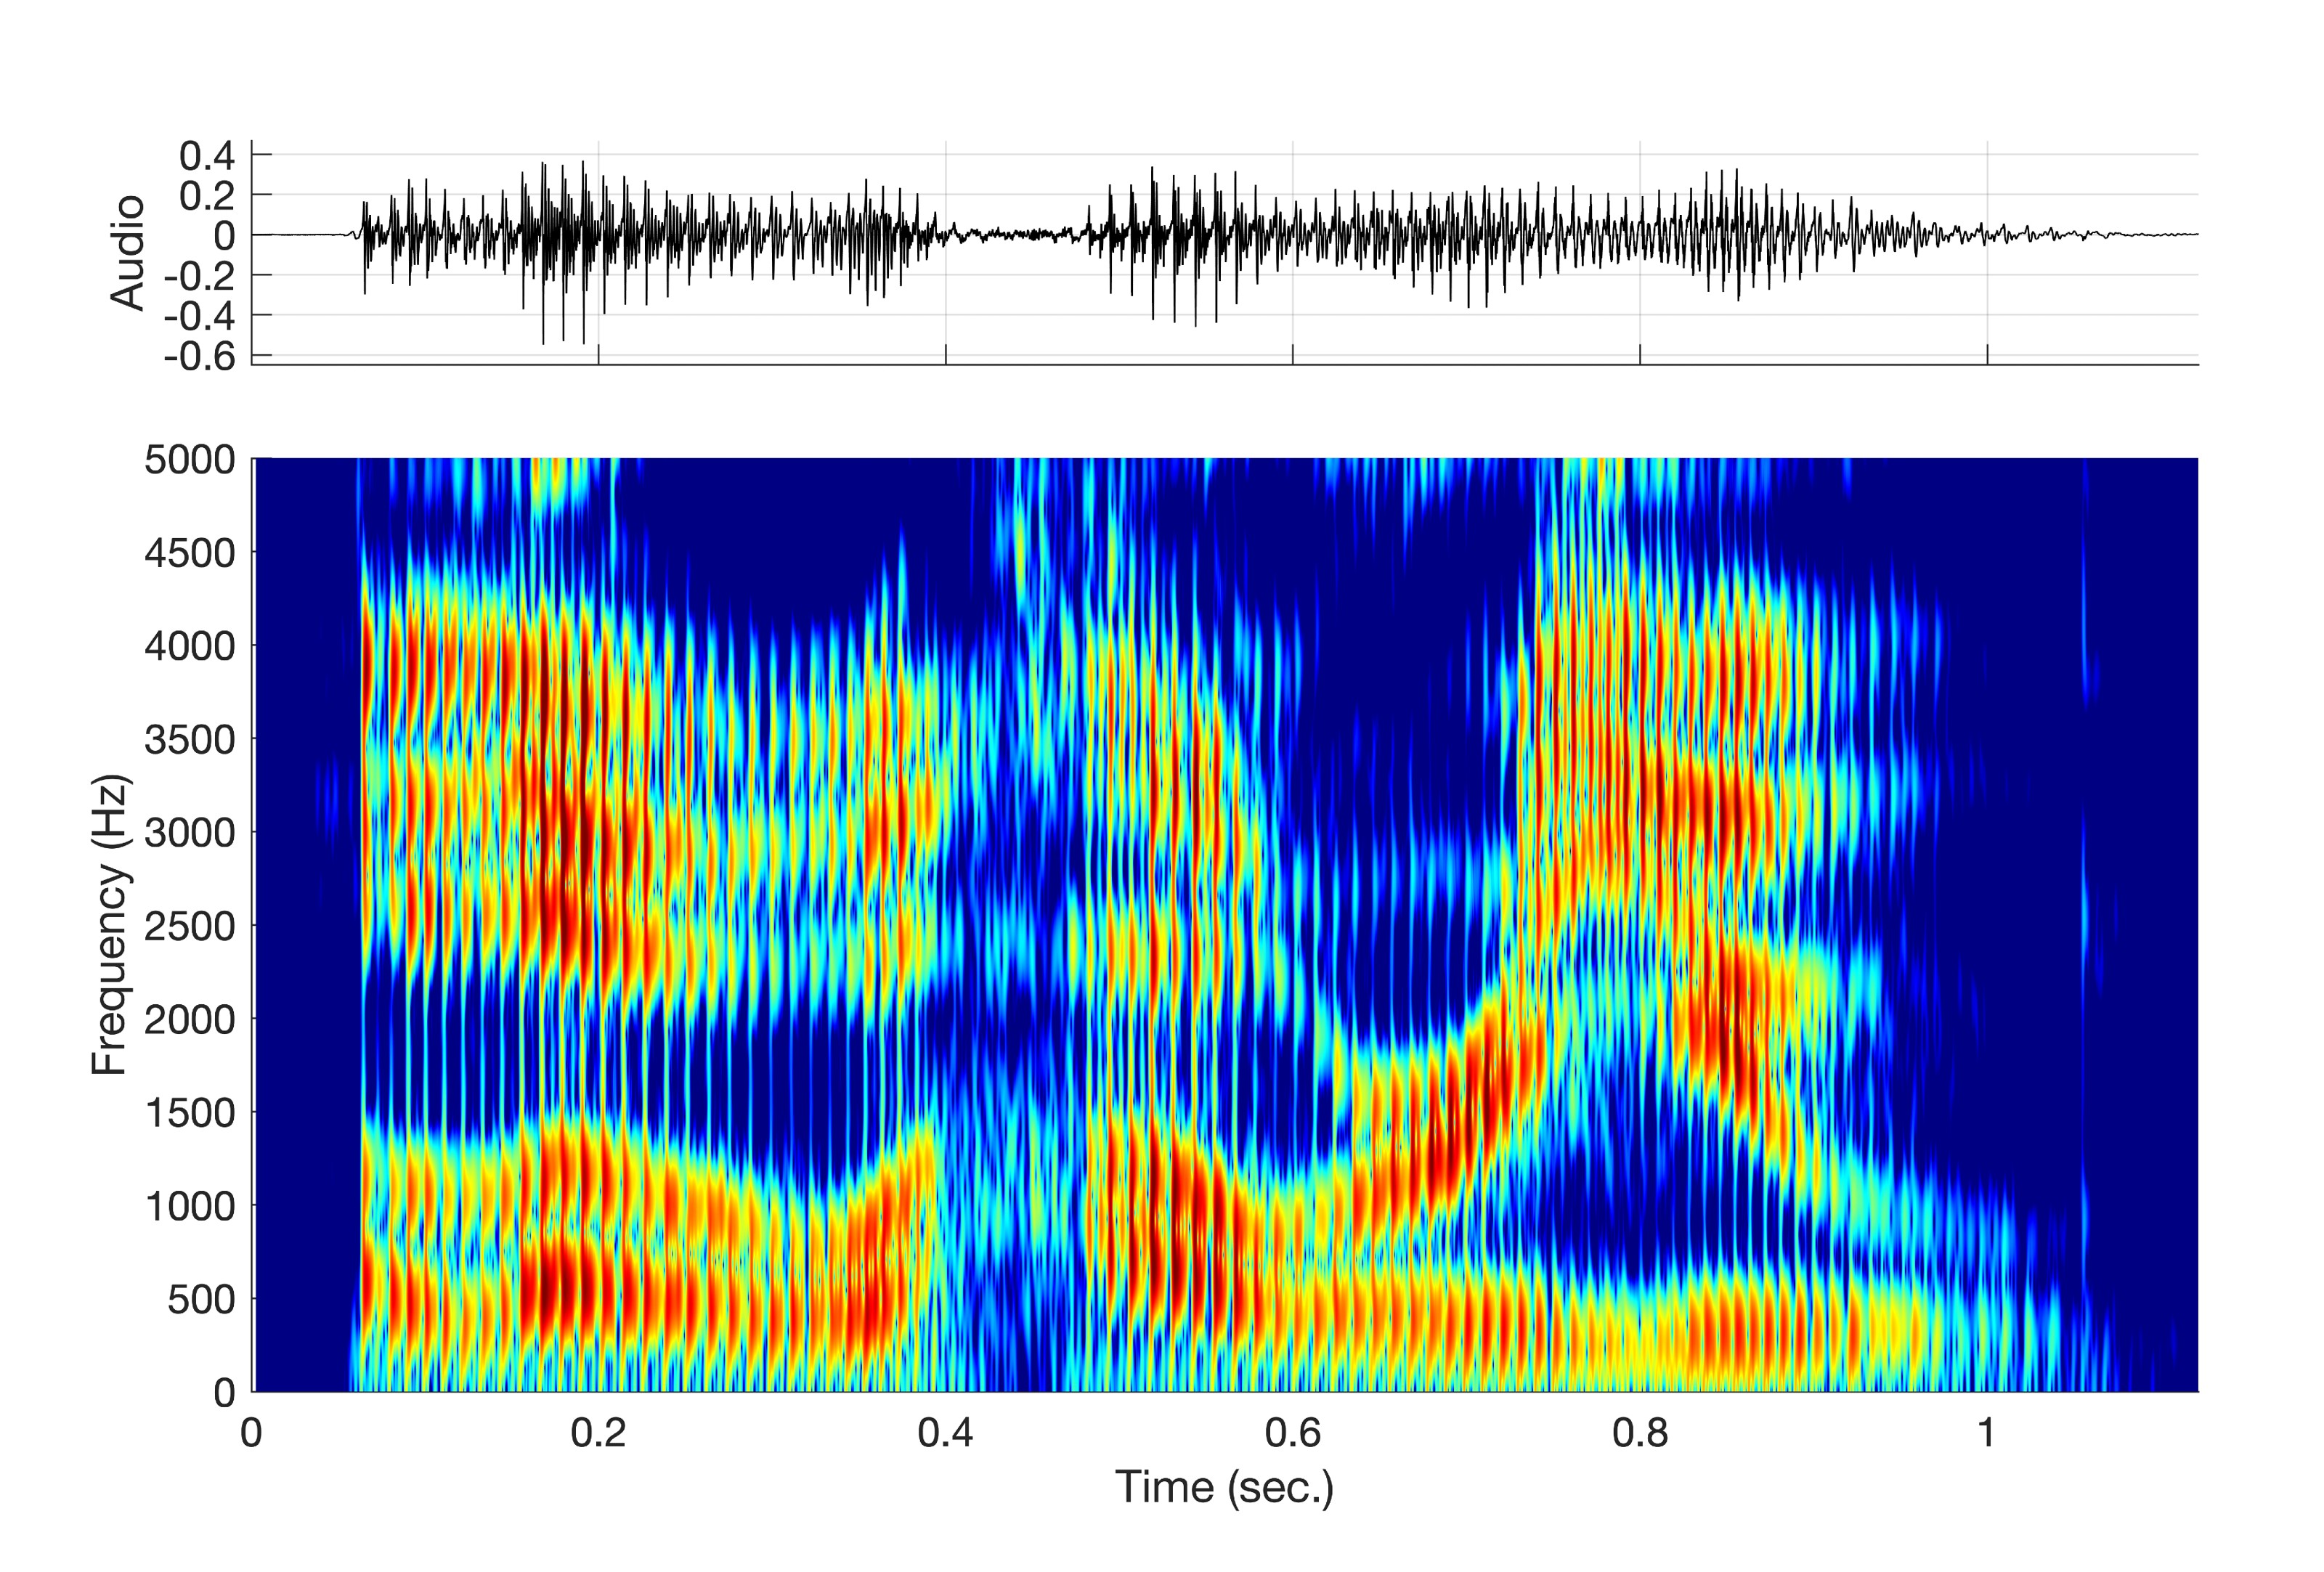 an image of a sound wave with a blue background.